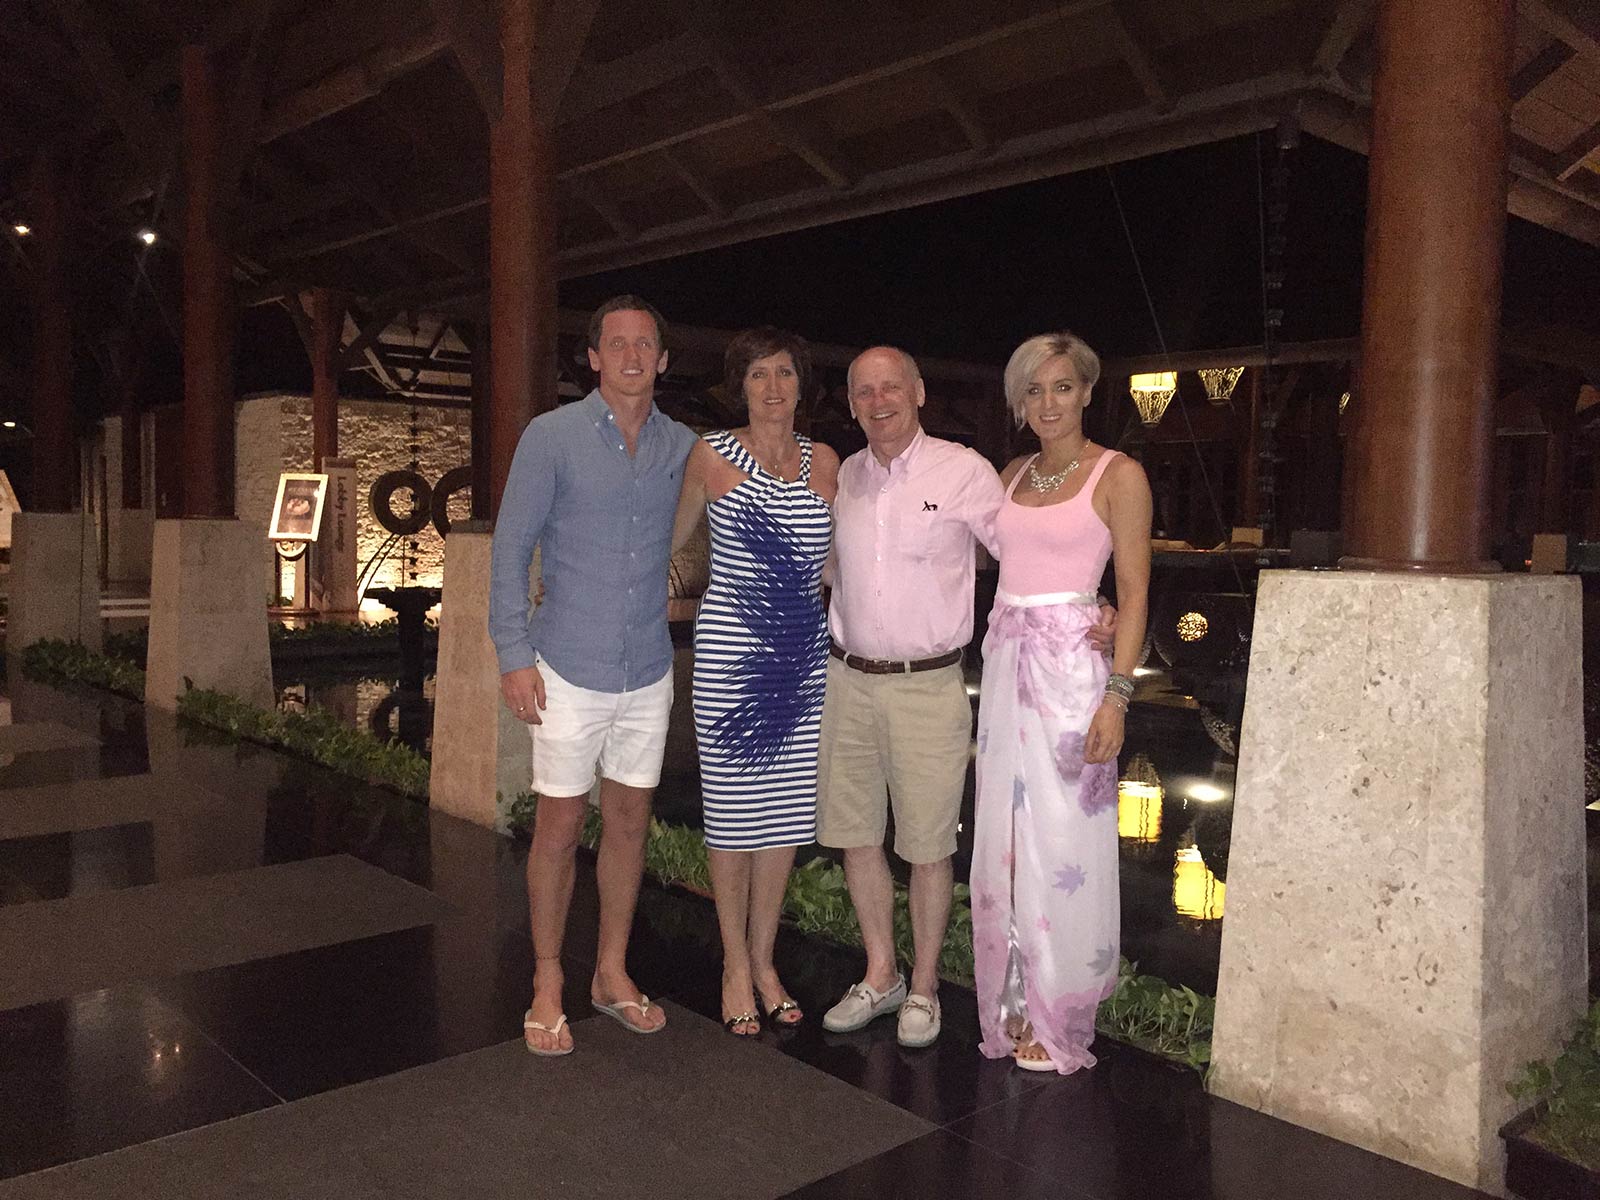 David Simpson and family in Boracay, Philippines. A week at the Shangri-La Resort, Boracay